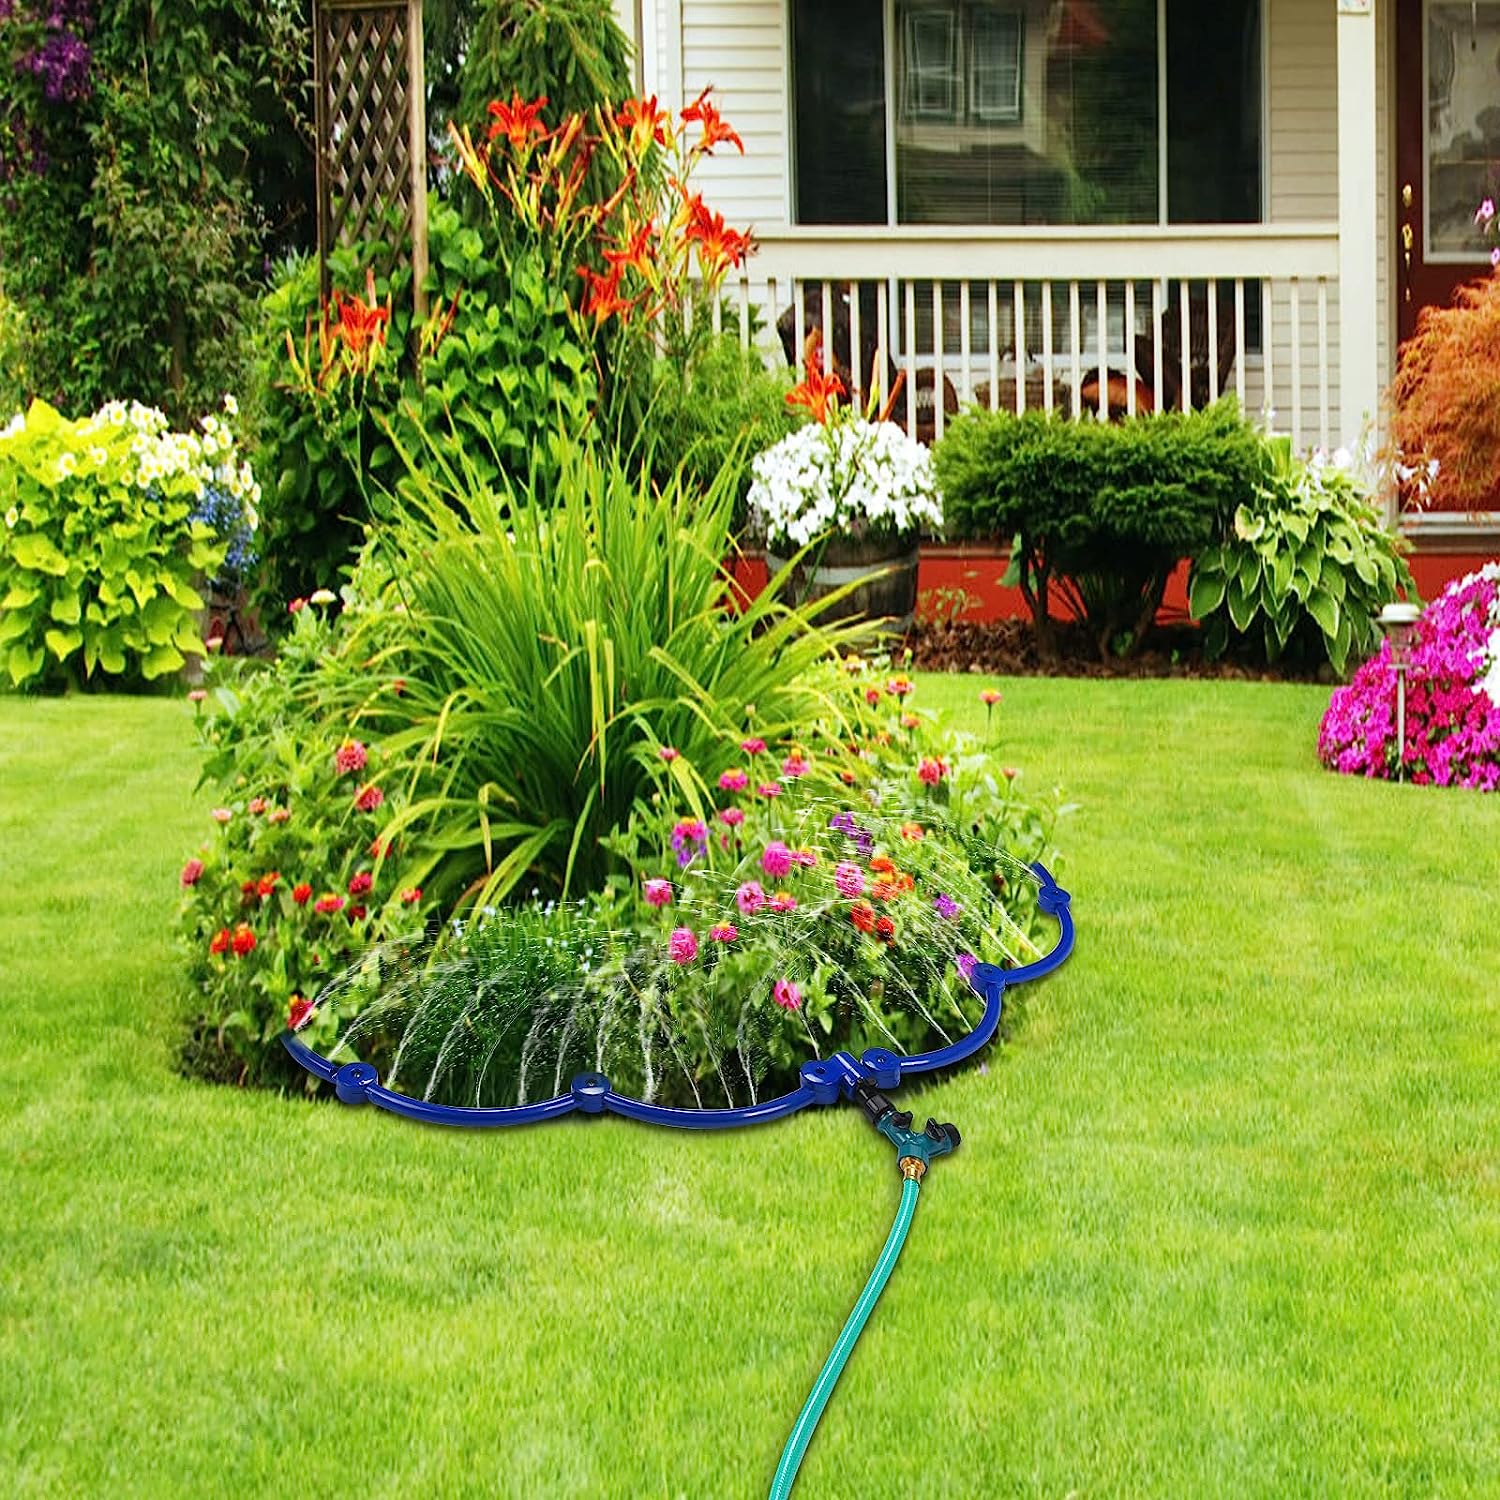 ZZM 360°Tree Water System Tree Watering Ring Circle Sprinkler and Irrigation System Targeted Water with Y Hose Splitter for New Tree Outdoor Plants Raised Garden Beds Shrubs (Large)